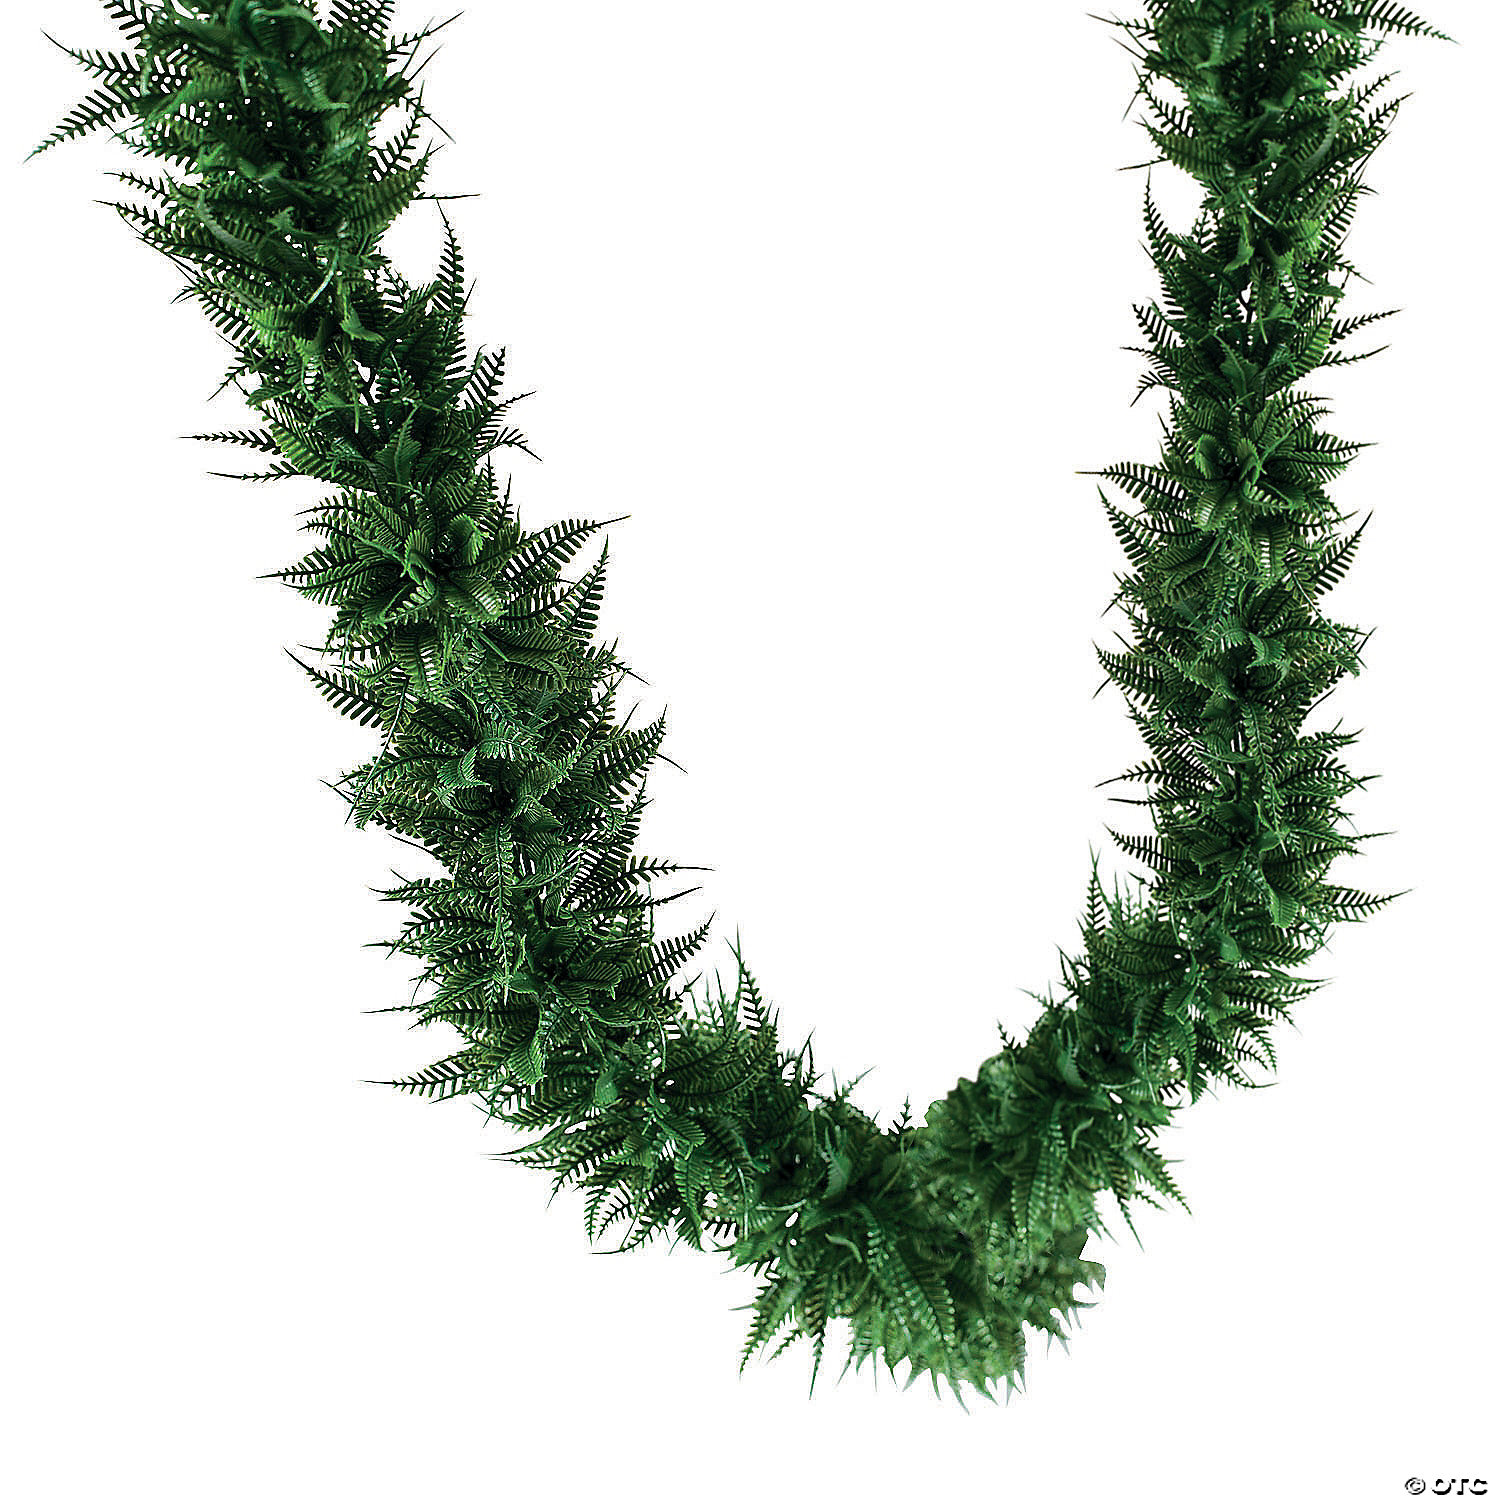 Add Depth and Texture to Any Natural décor with This Vibrant Vickerman 72 Artificial Green Fern Garland Maintenance Free Garland. 